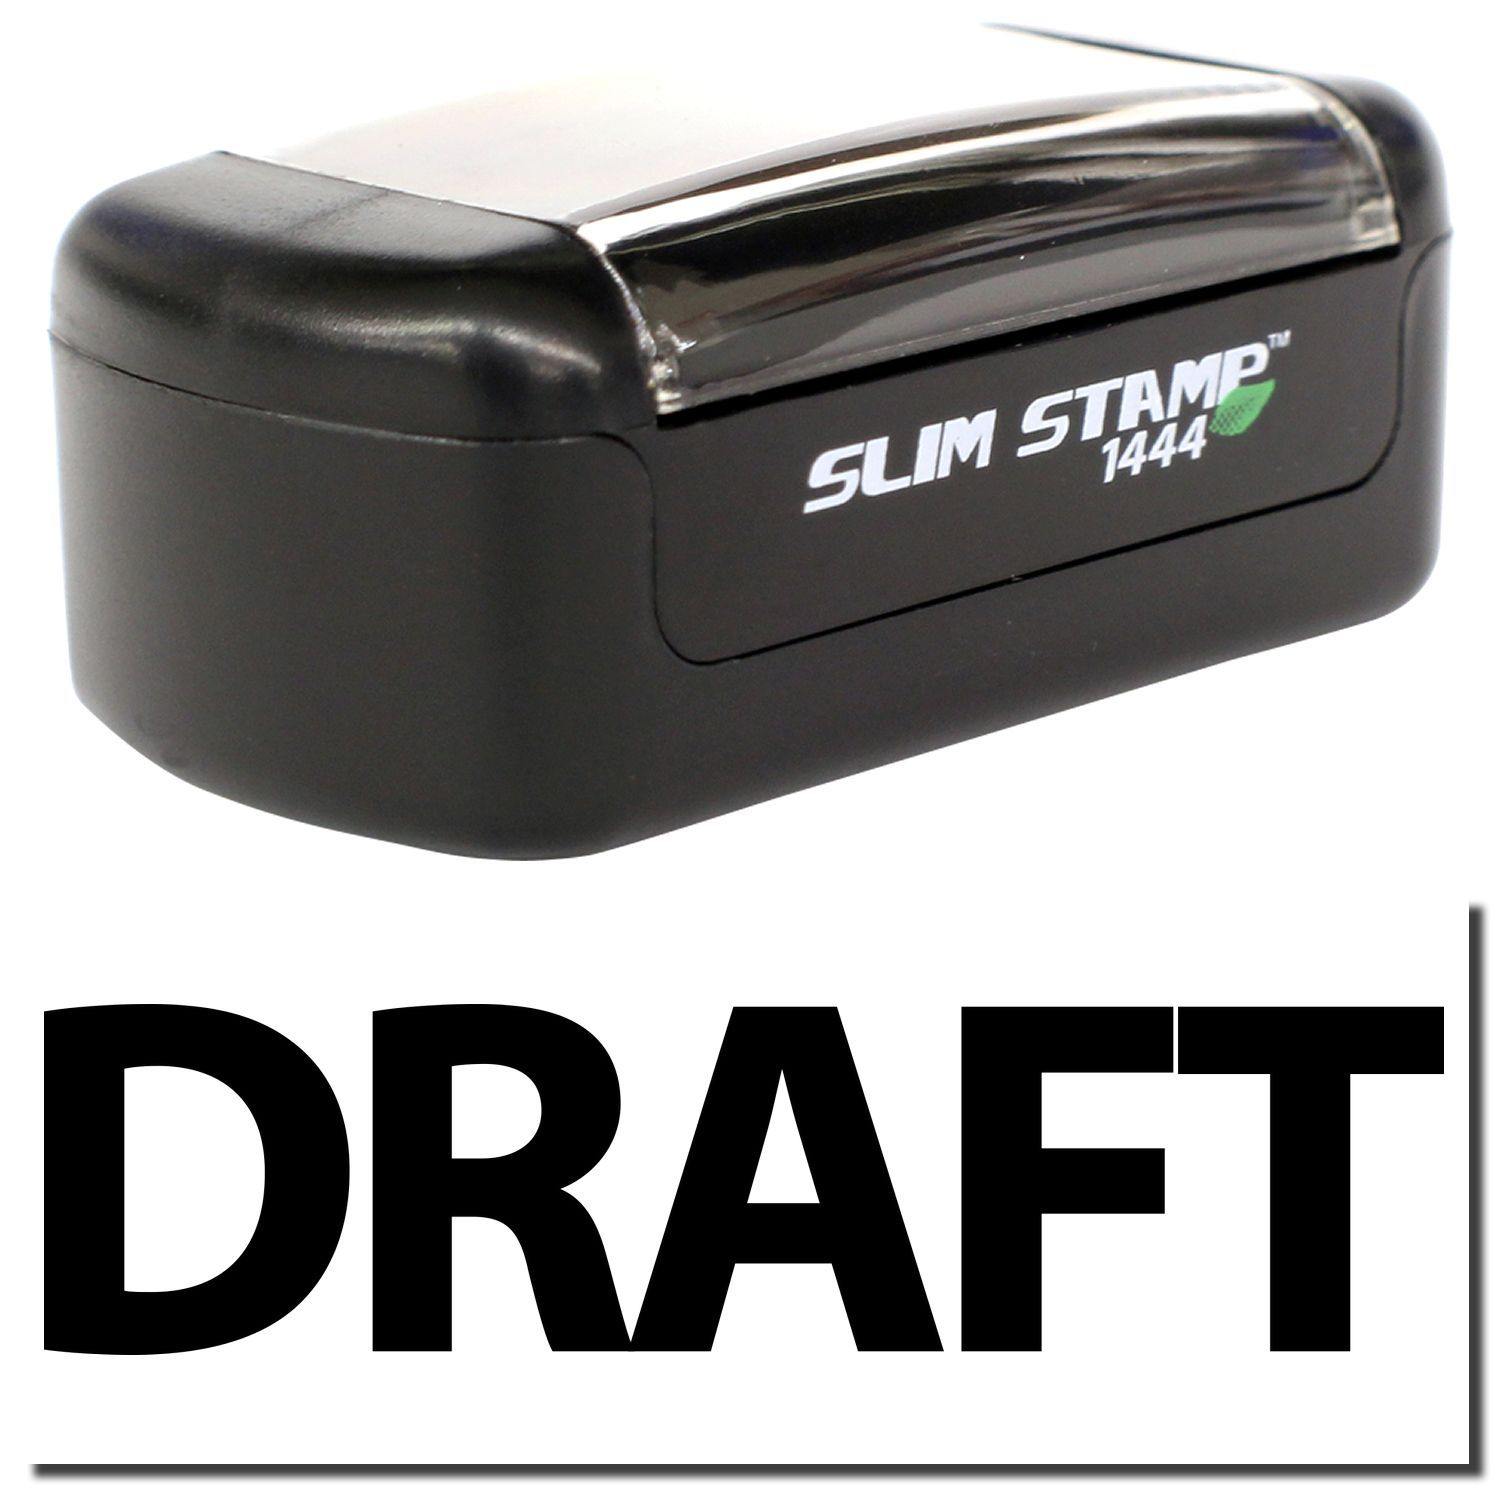 A stock office pre-inked stamp with a stamped image showing how the text "DRAFT" in bold font is displayed after stamping.